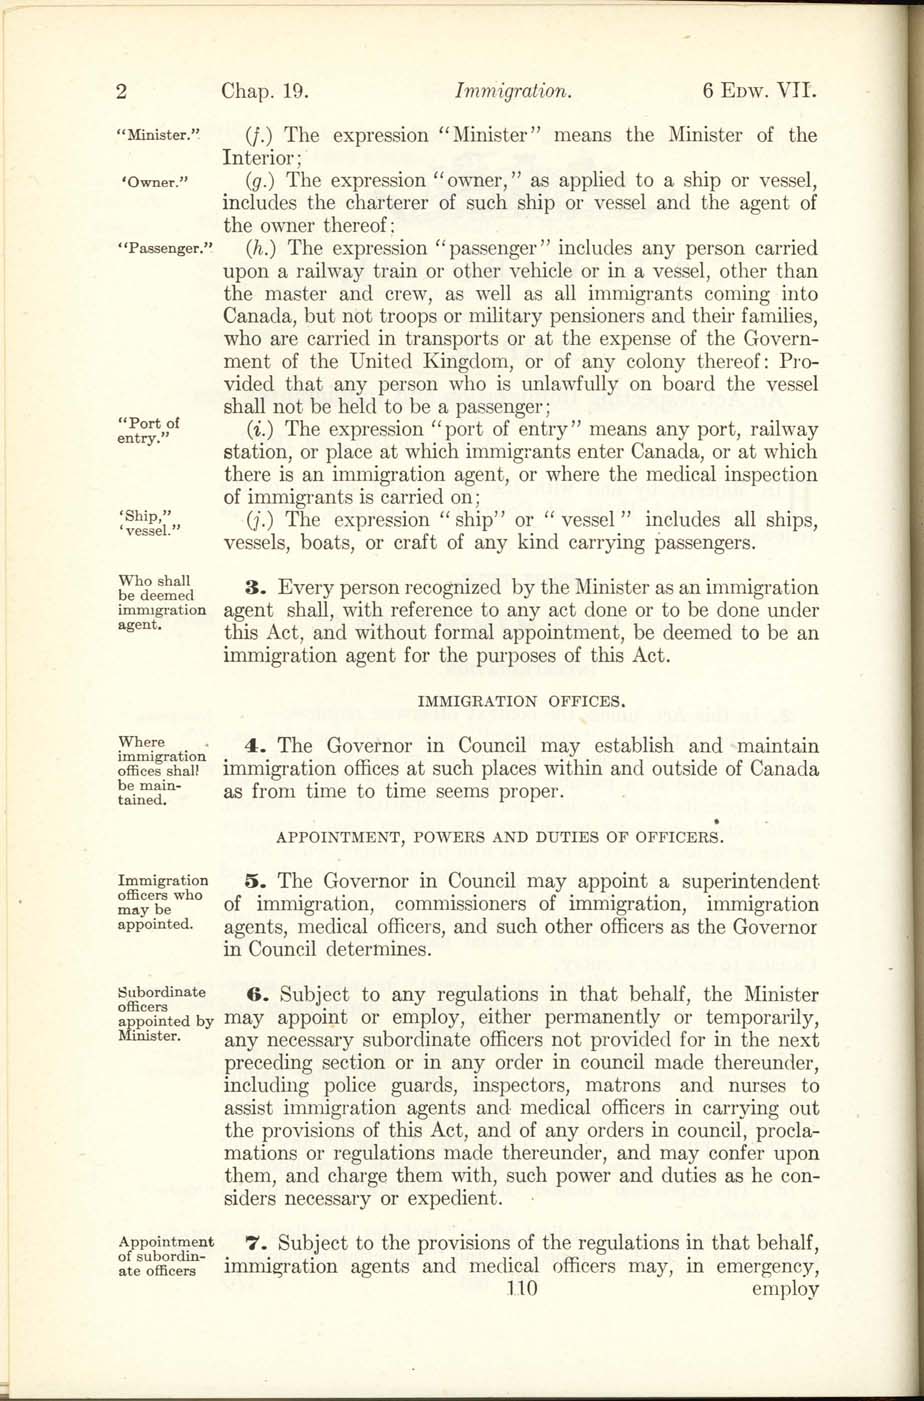 Chap. 19 Page 110 Immigration Act, 1906